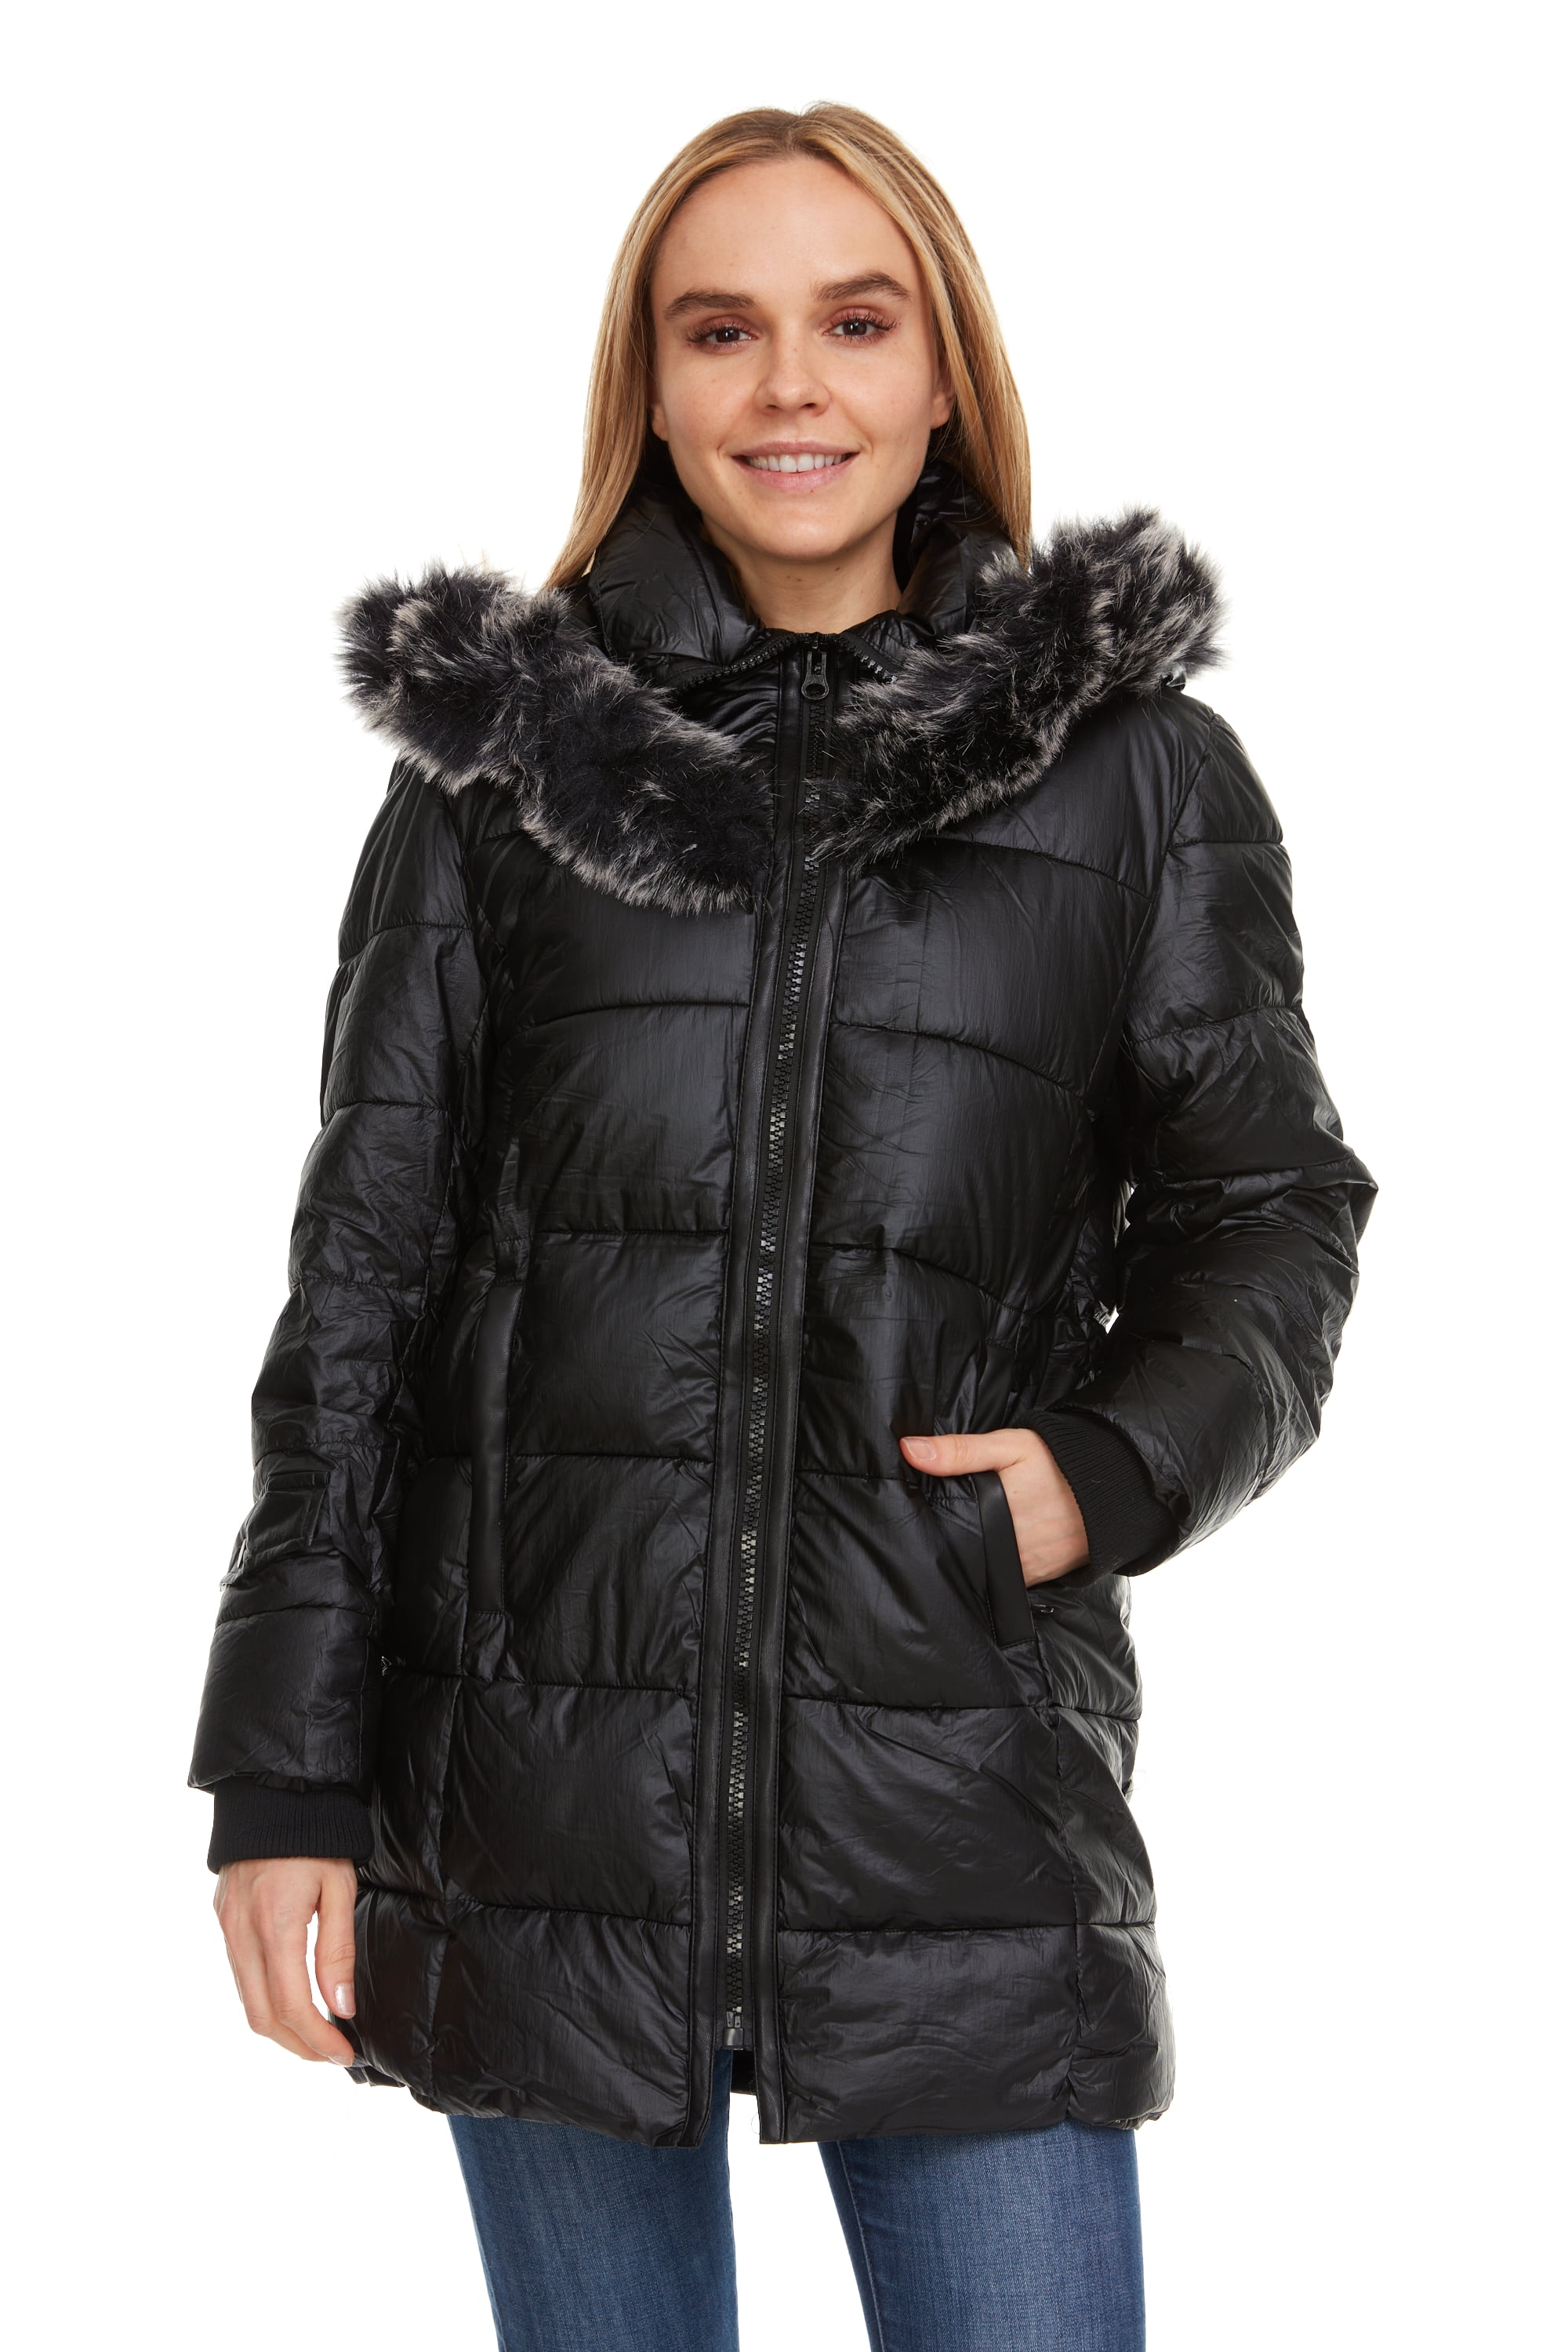 Celsius Women's Metalic Hooded Puffer Jacket (Standard and Plus Size ...